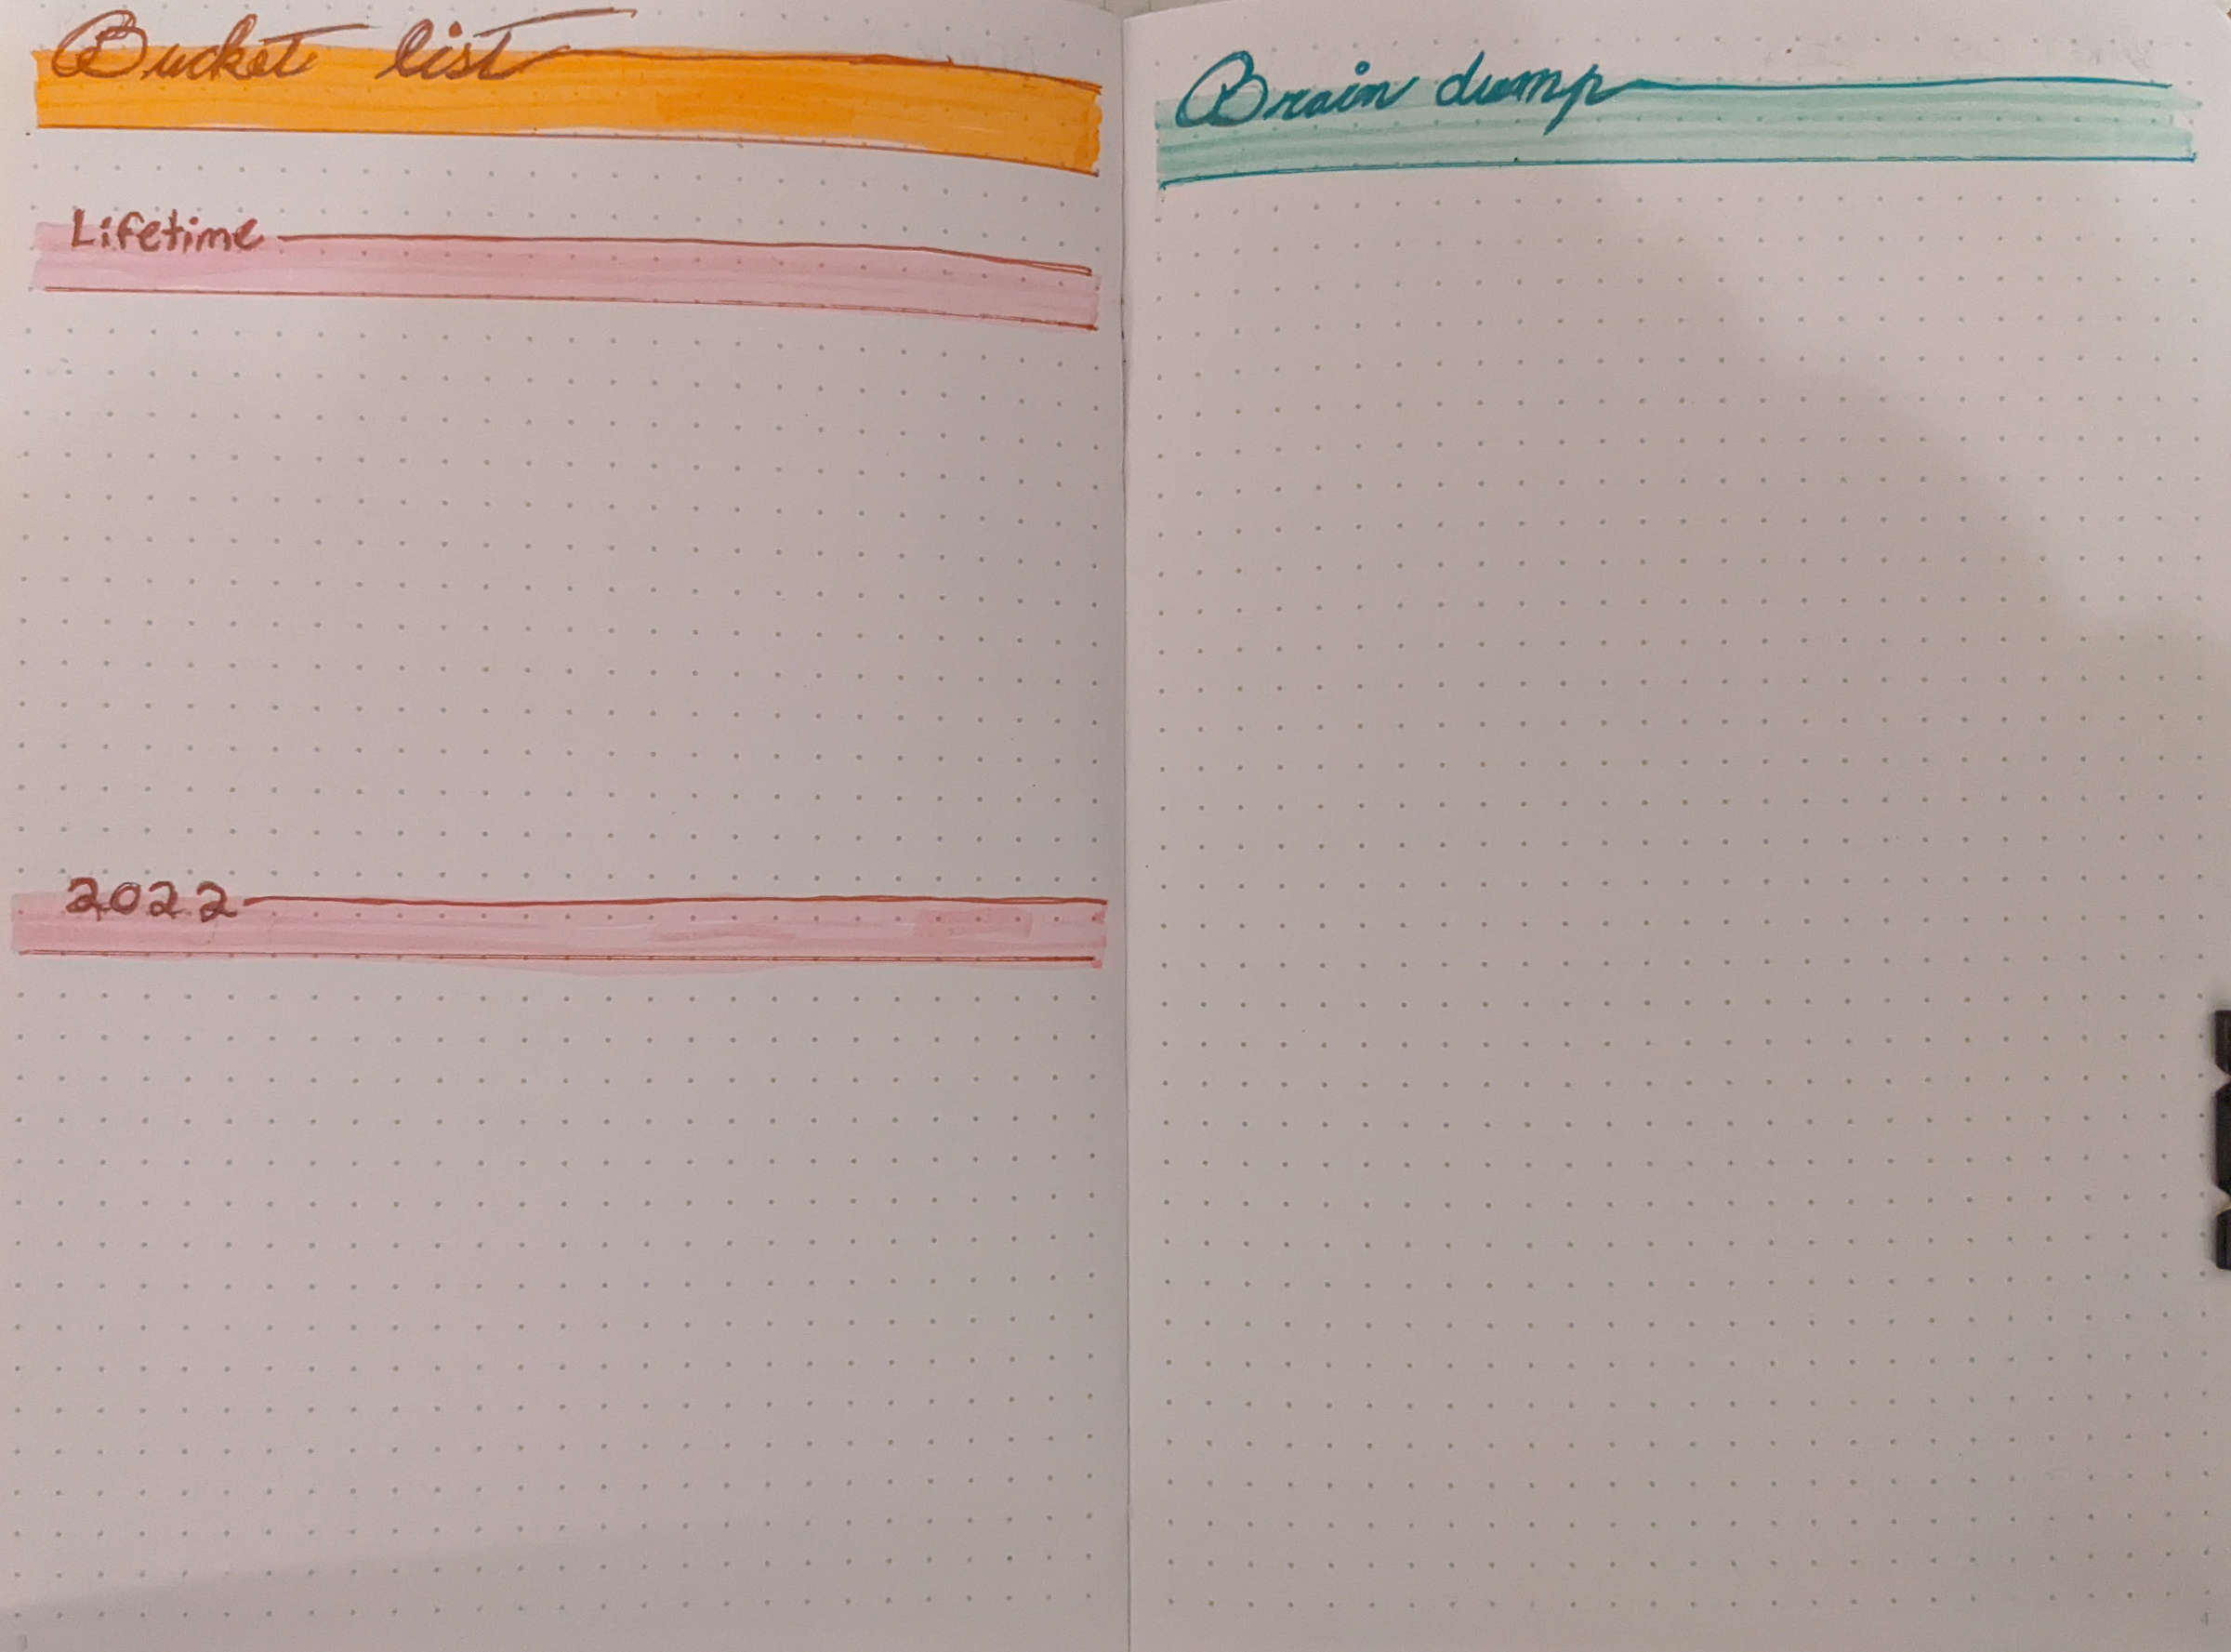 Two-page bullet journal spread. On the left is a “bucket list” section.  On the right is a ‘braindump’ section.